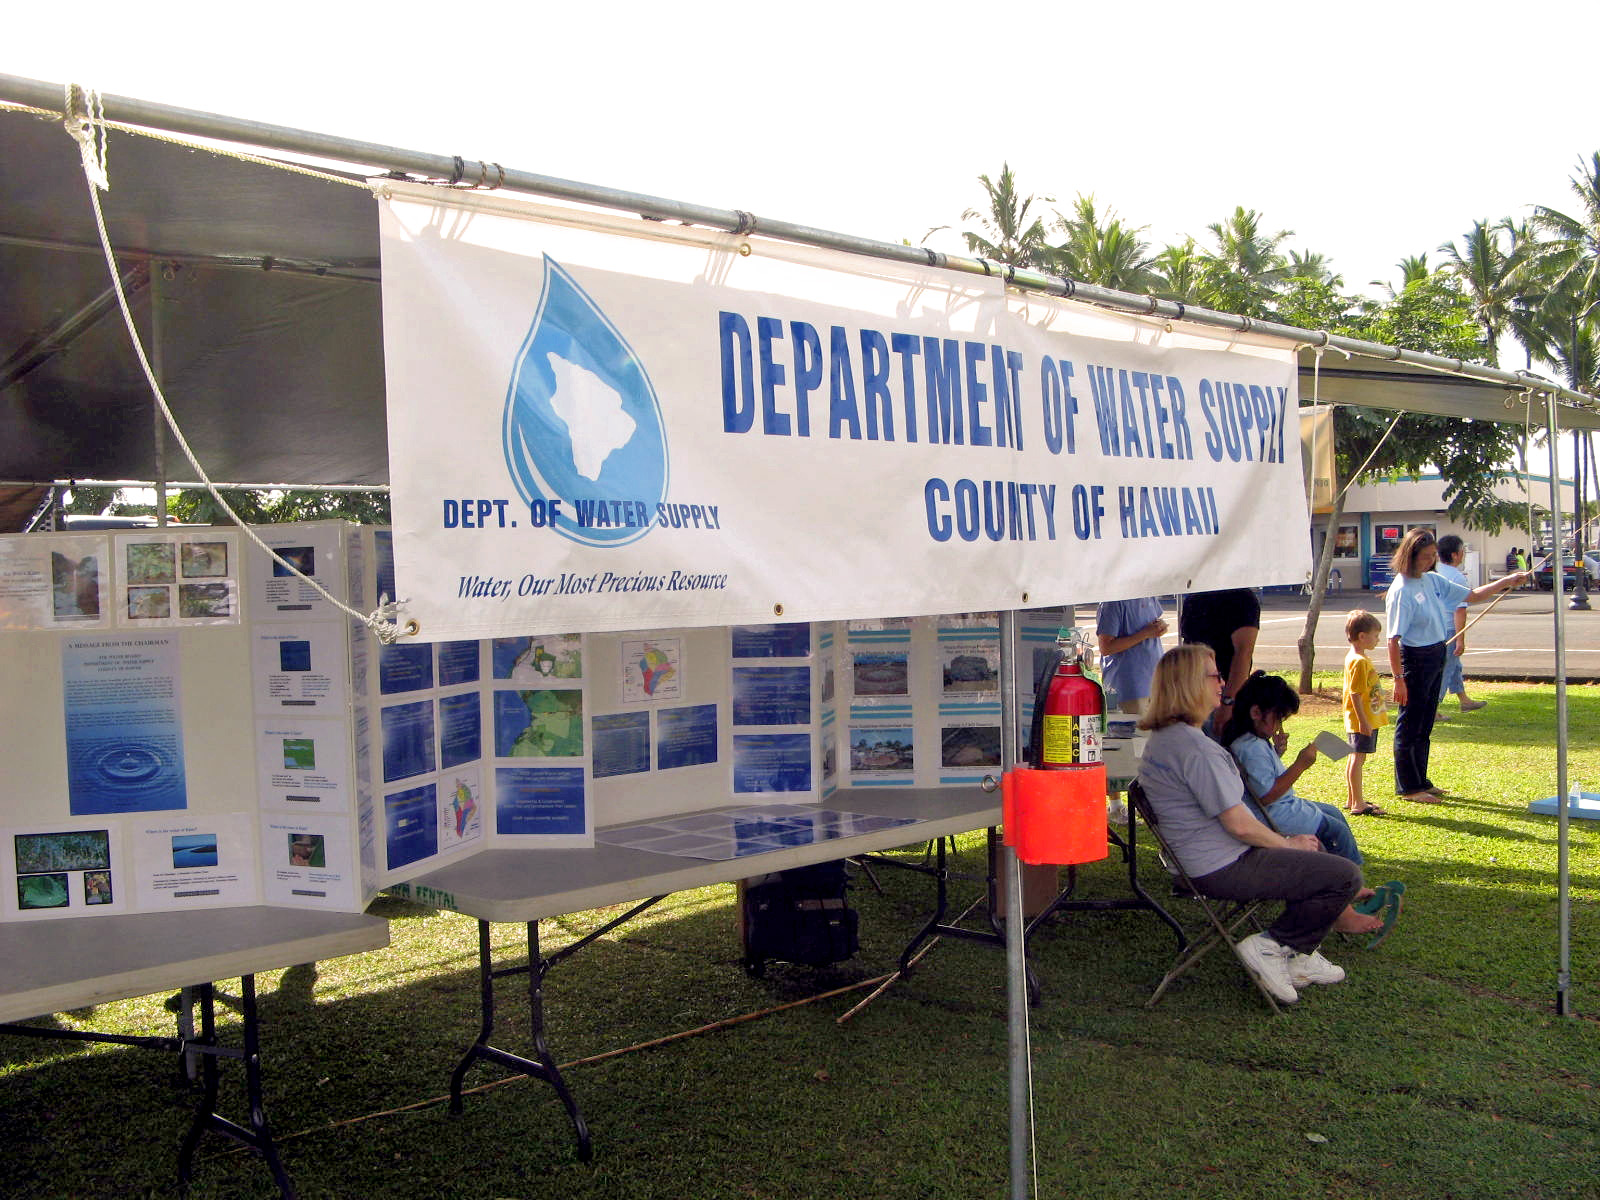 Department of water supply